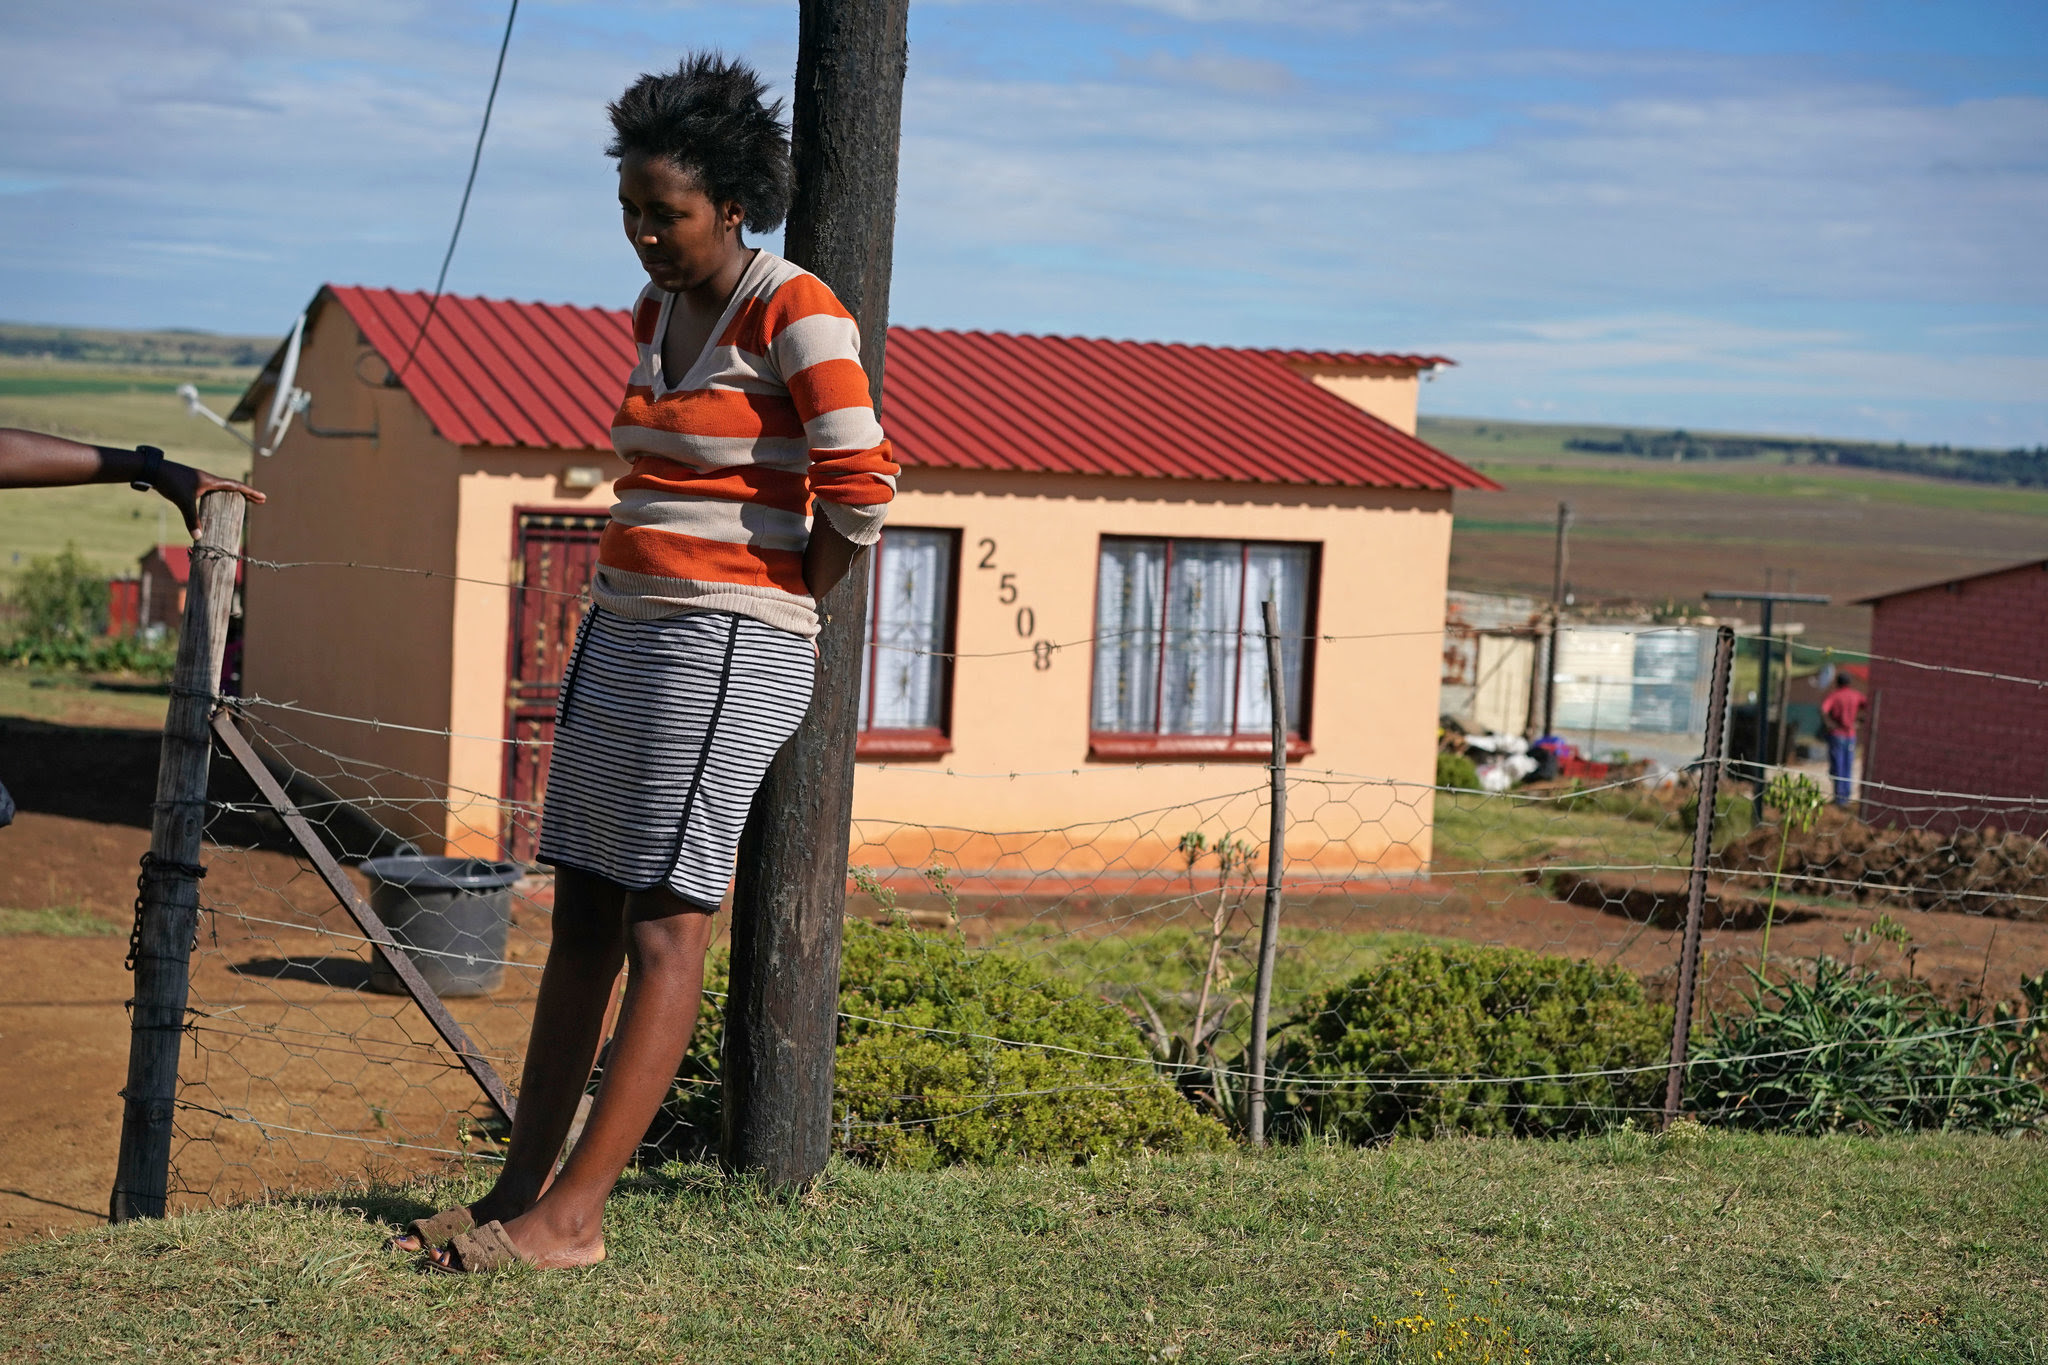 Andisiwe Mlaba outside her home in Warden. Her father, Vusi Mlaba, a member of the Democratic Alliance who spoke out against corruption in Free State, was gunned down nearby. Credit Joao Silva/The New York Times 